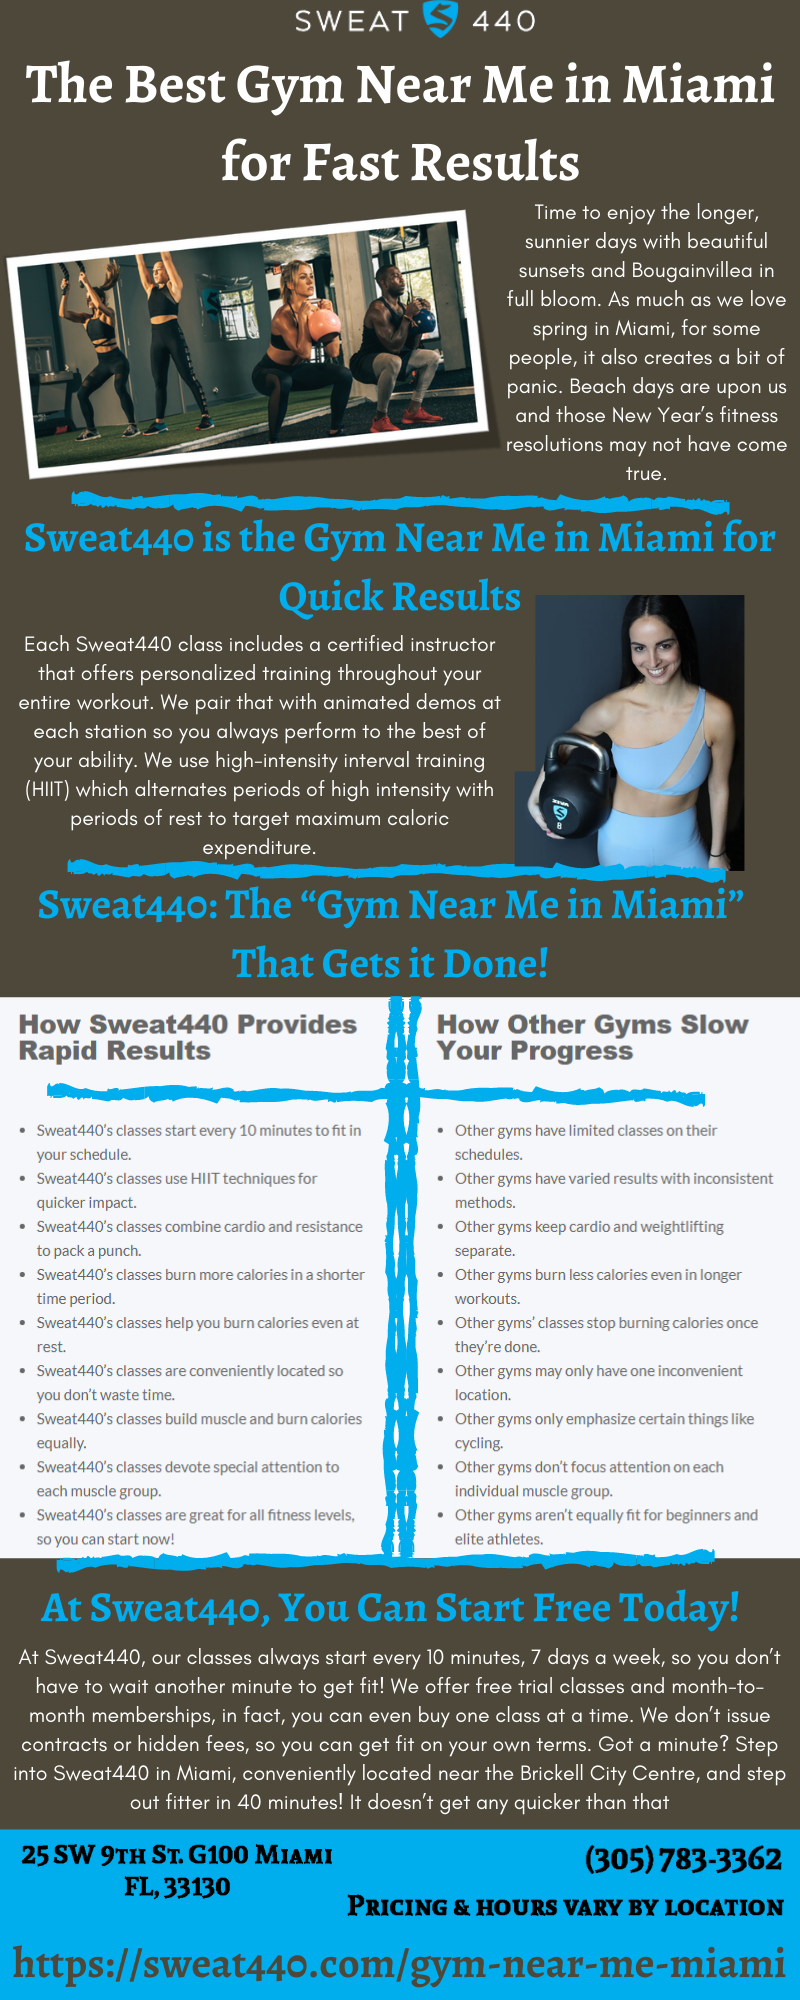 The Best Gym Near Me in Miami for Fast Results - SWEAT440